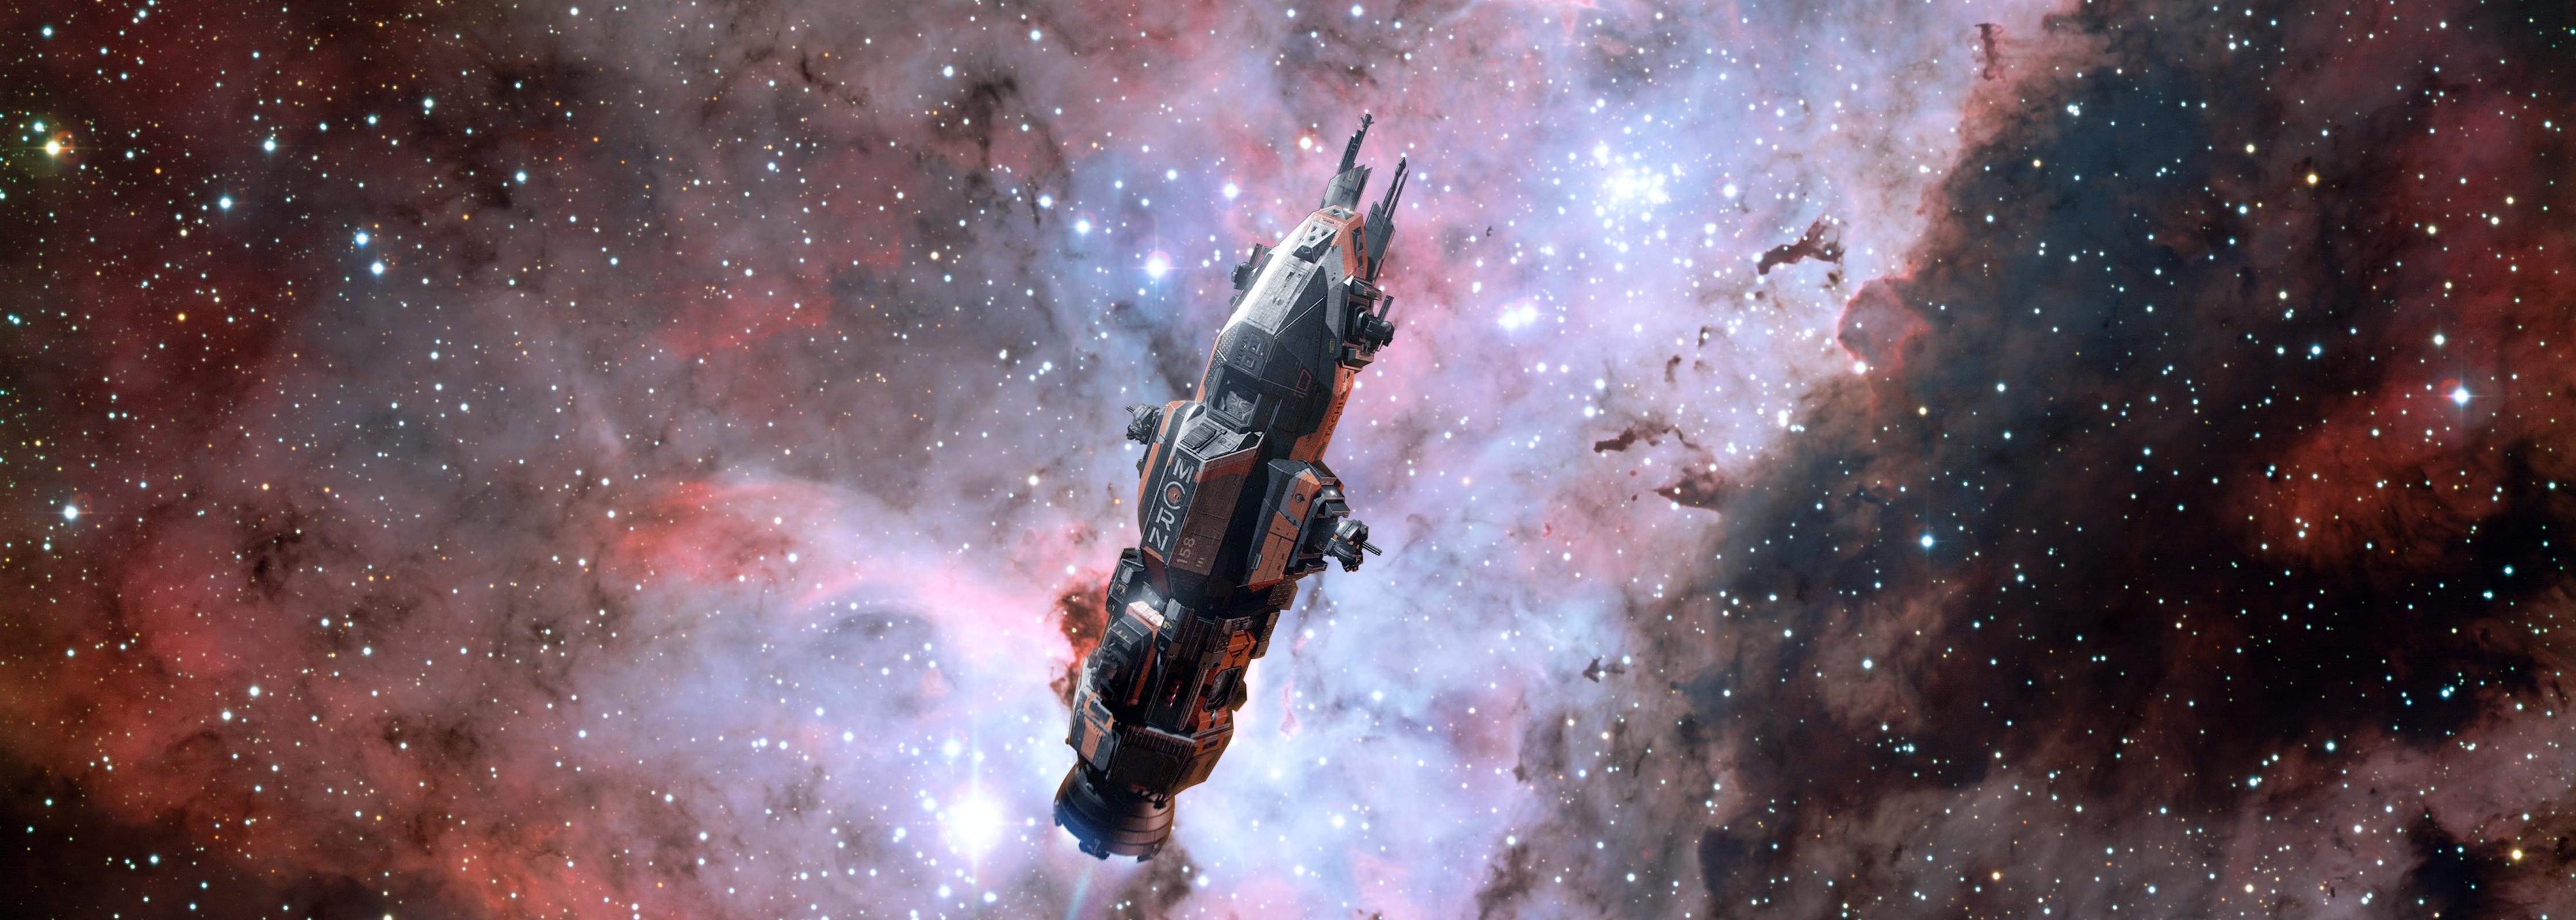 General 4480x1600 The Expanse space science fiction TV series spaceship Rocinante vehicle